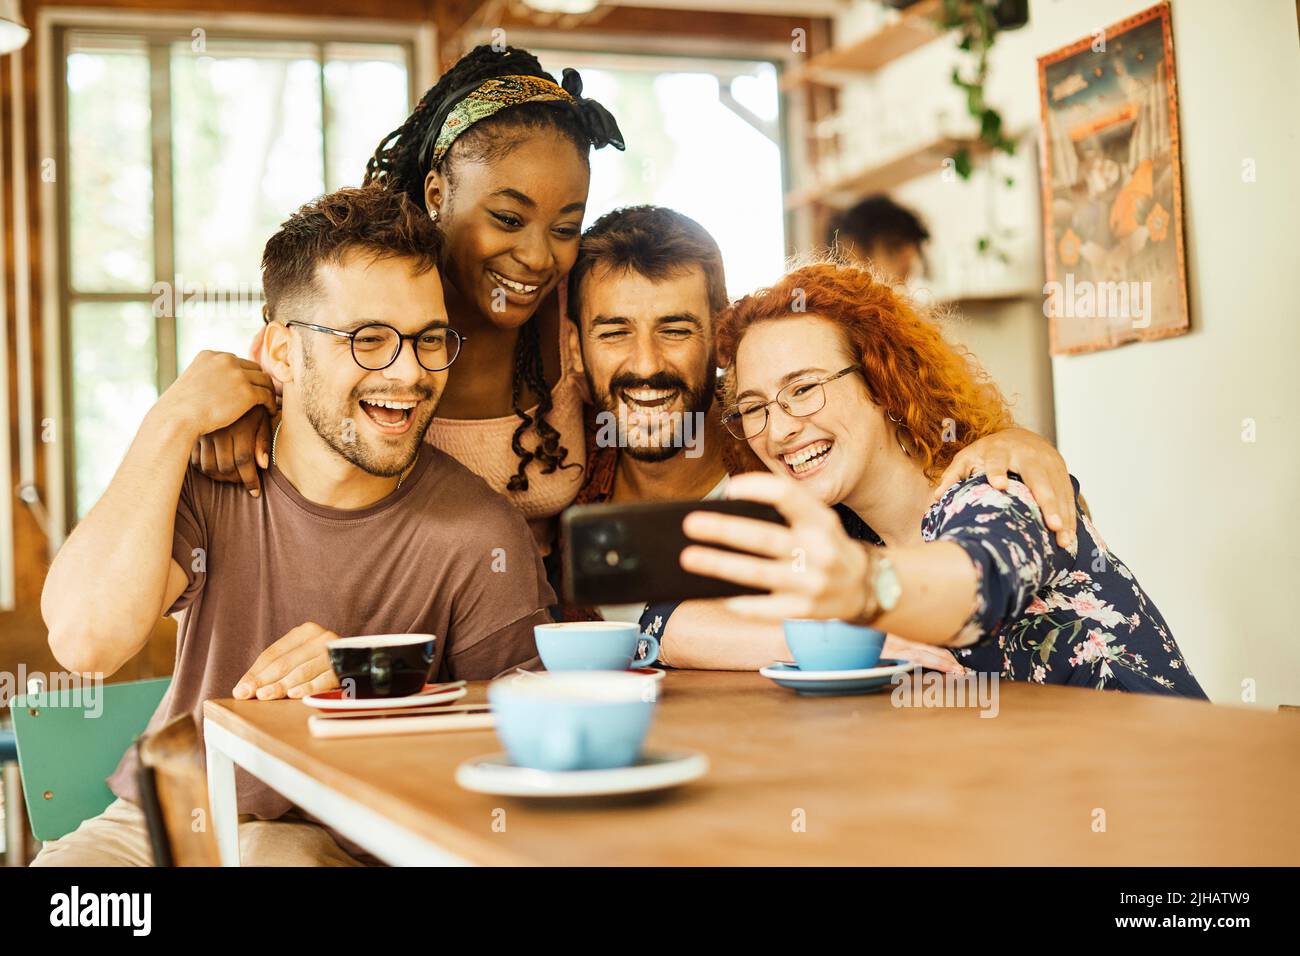 woman friendship fun friend cafe smiling lifestyle happy selfie camera photo people cheerful laughing coffee Stock Photo